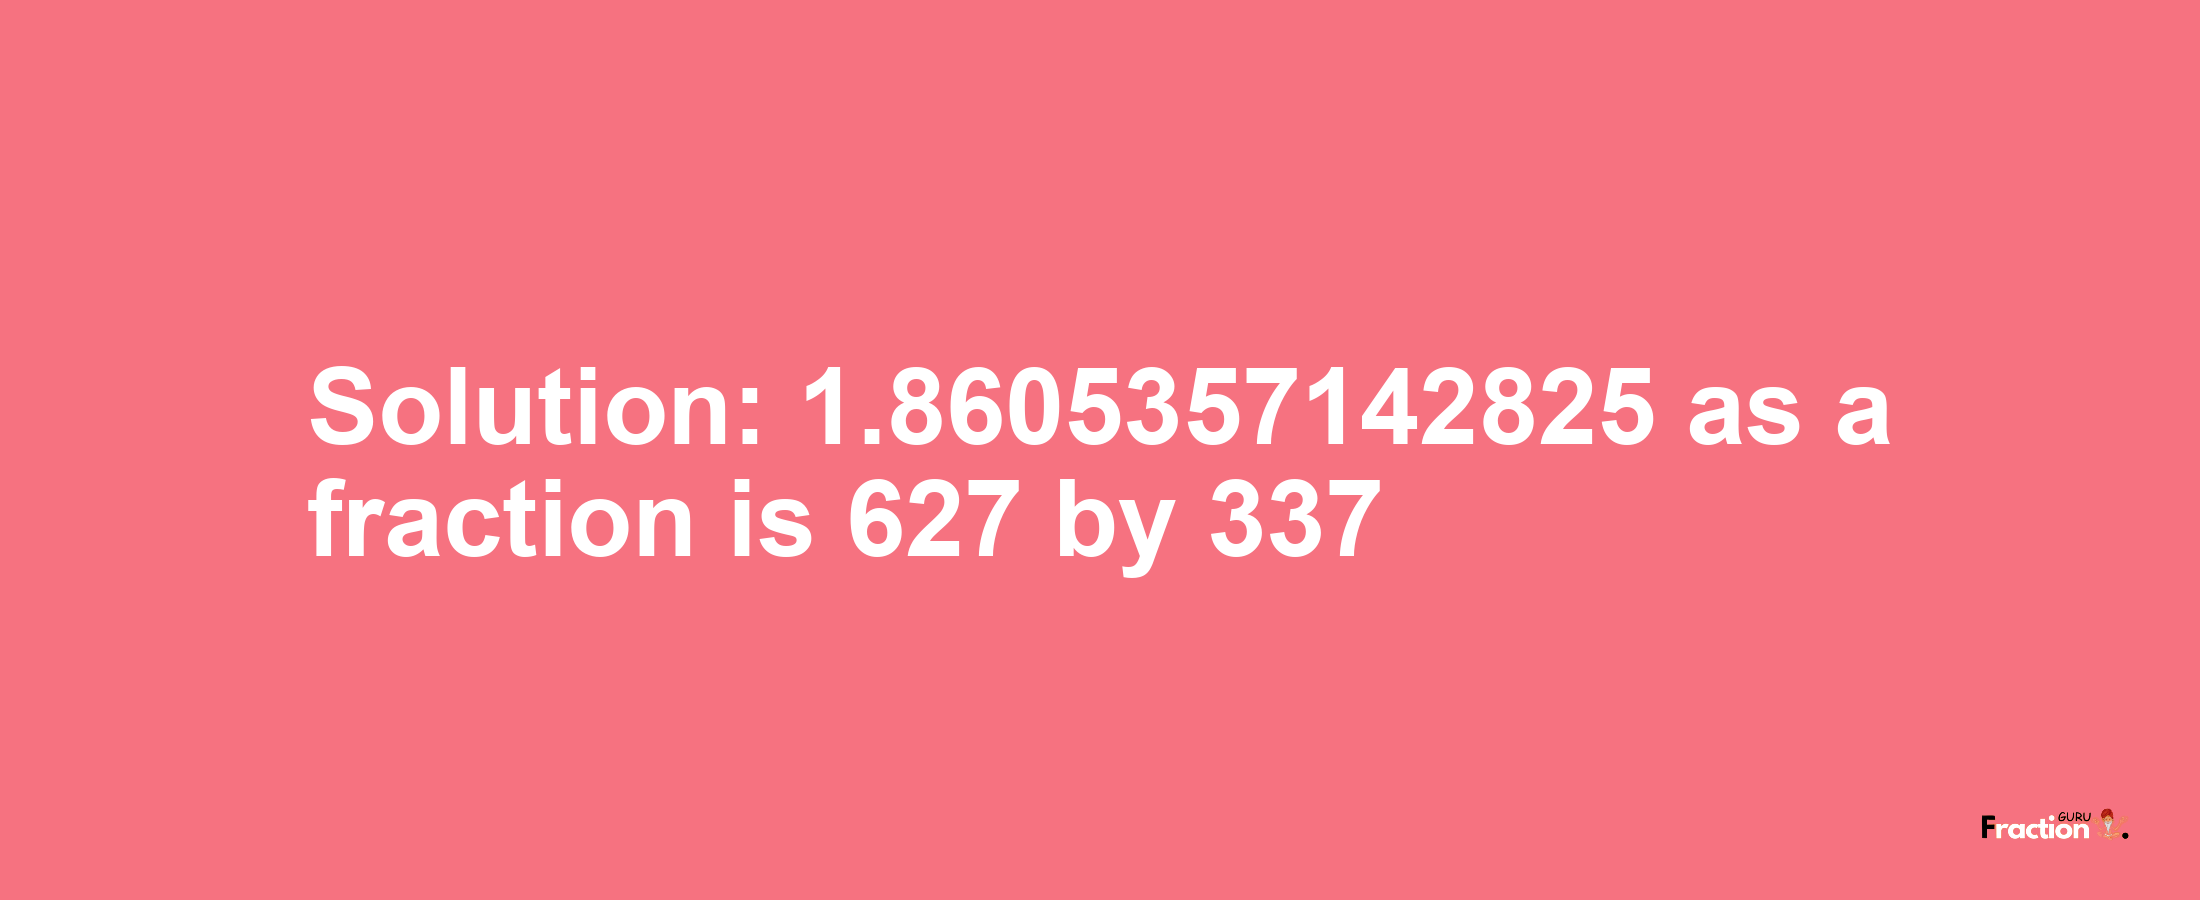 Solution:1.8605357142825 as a fraction is 627/337